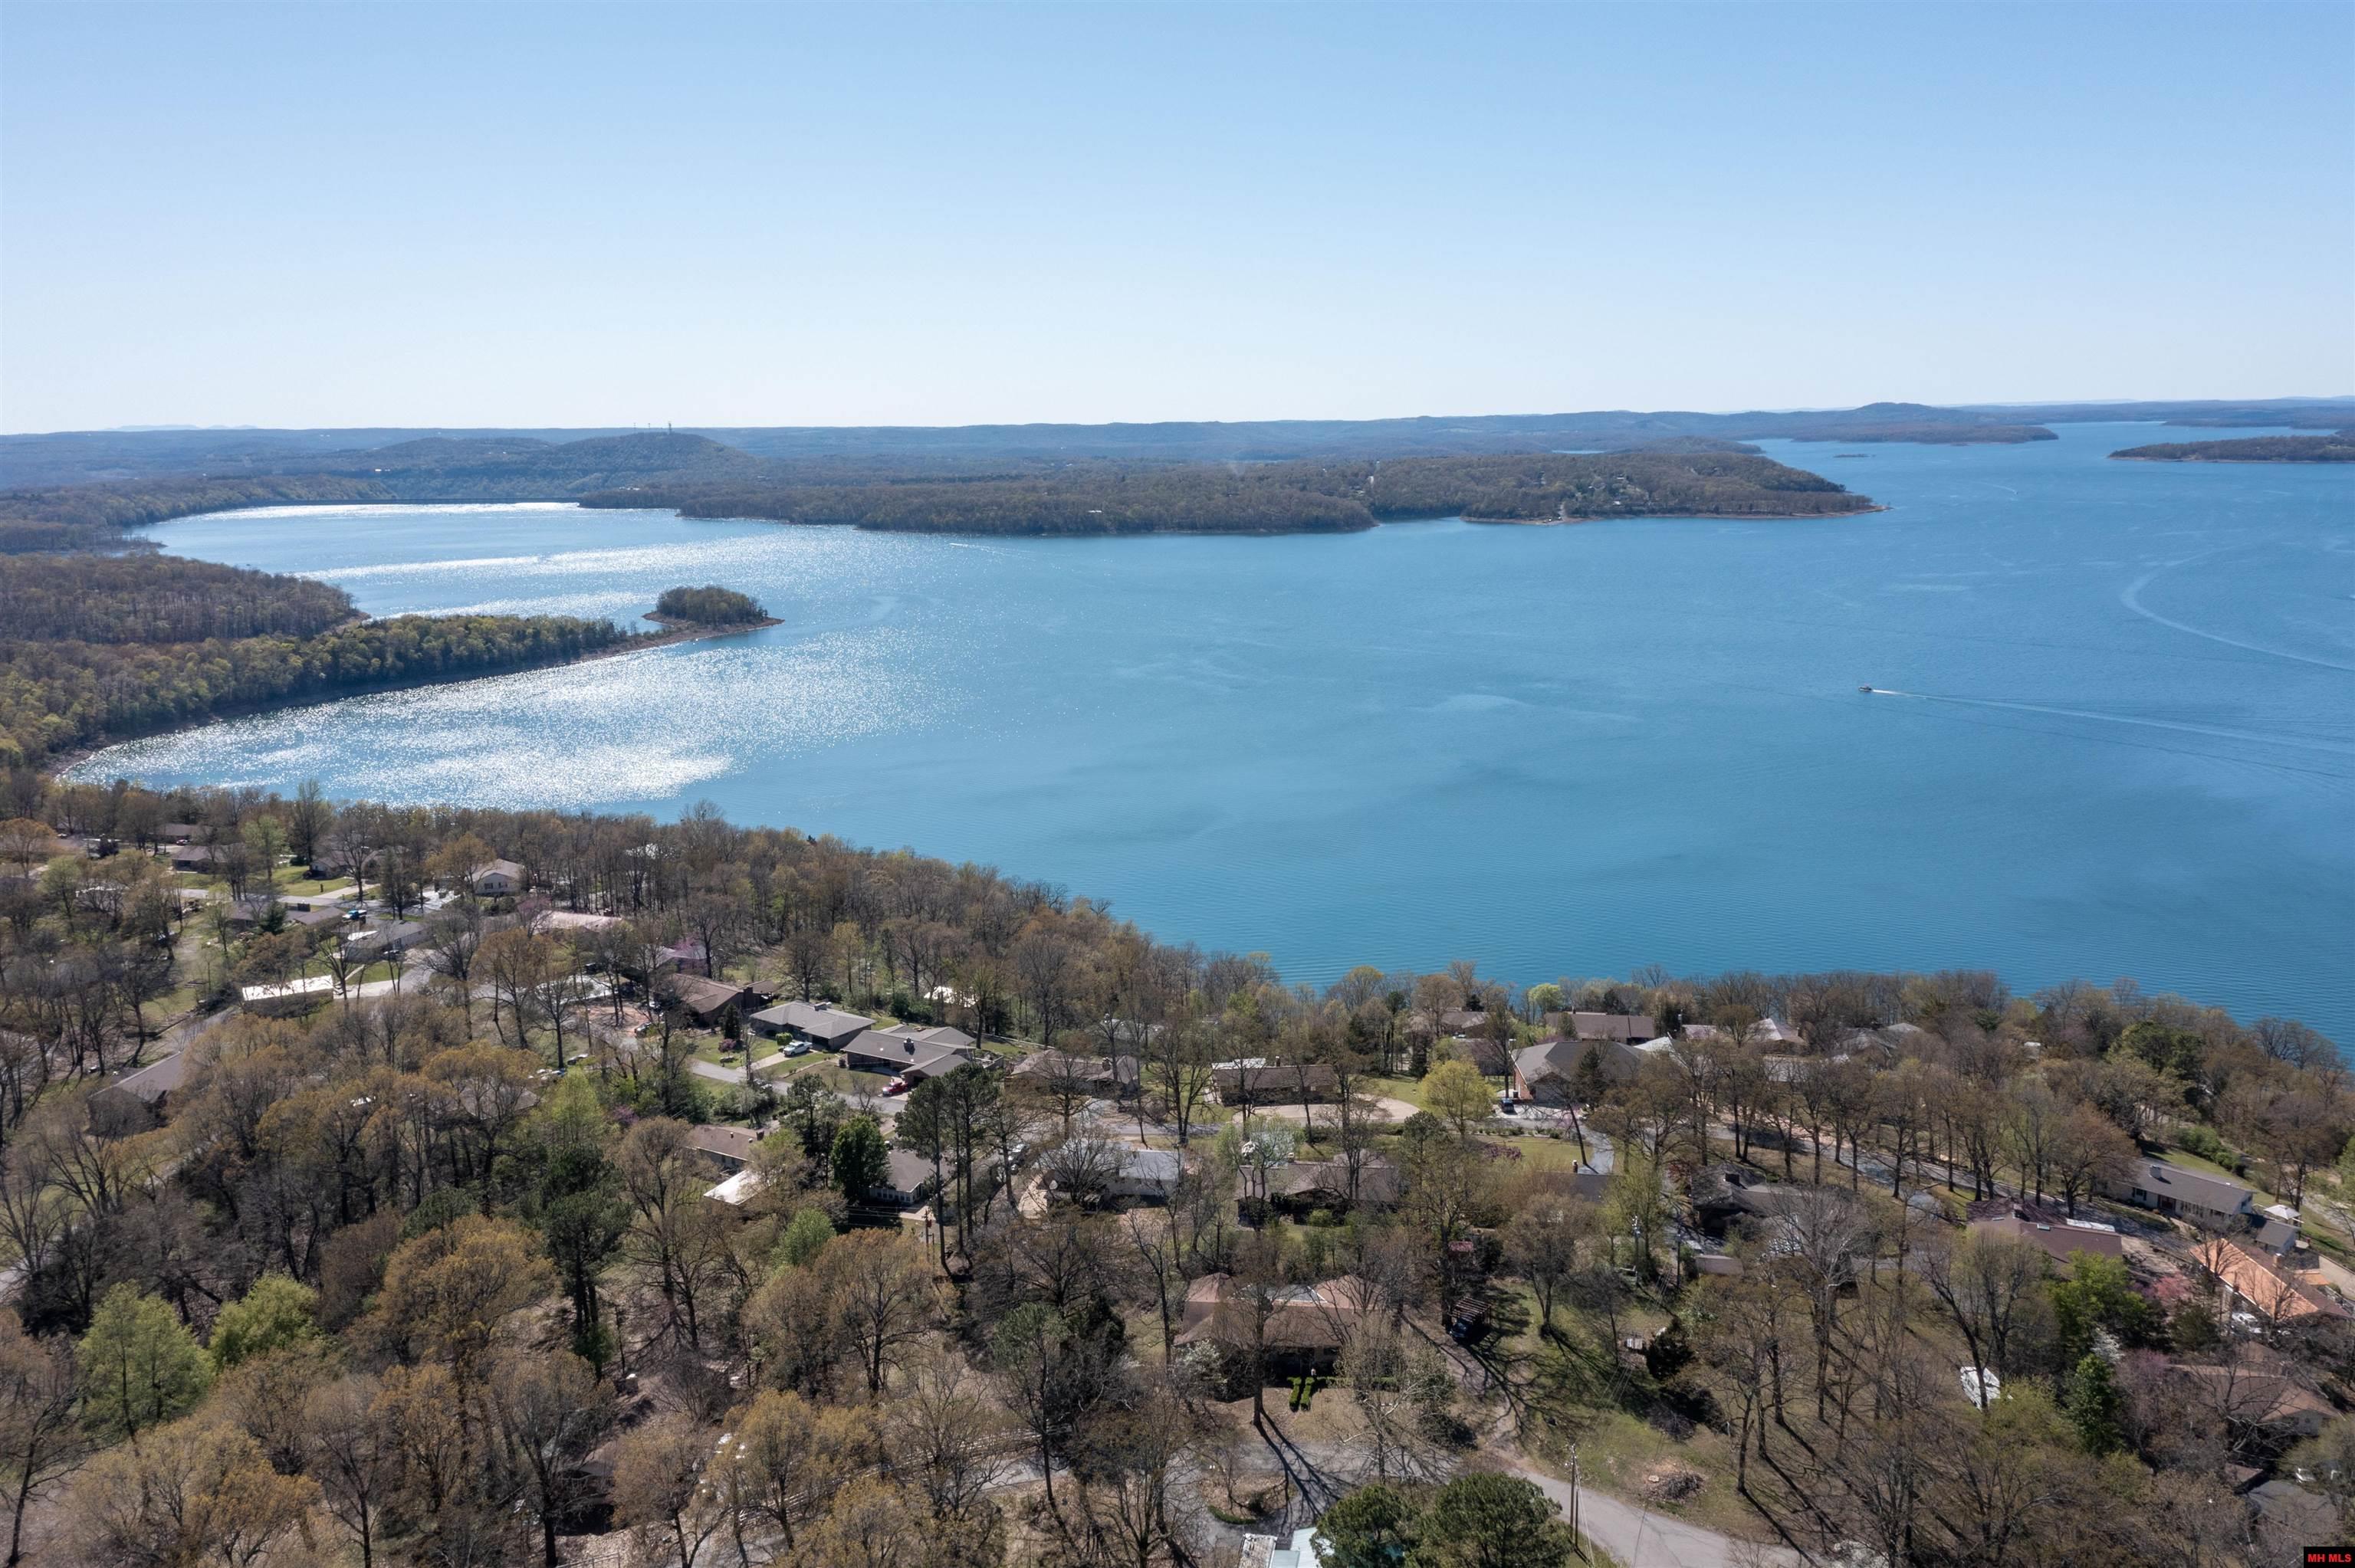 693 EDGEWOOD BAY DRIVE Lakeview, AR